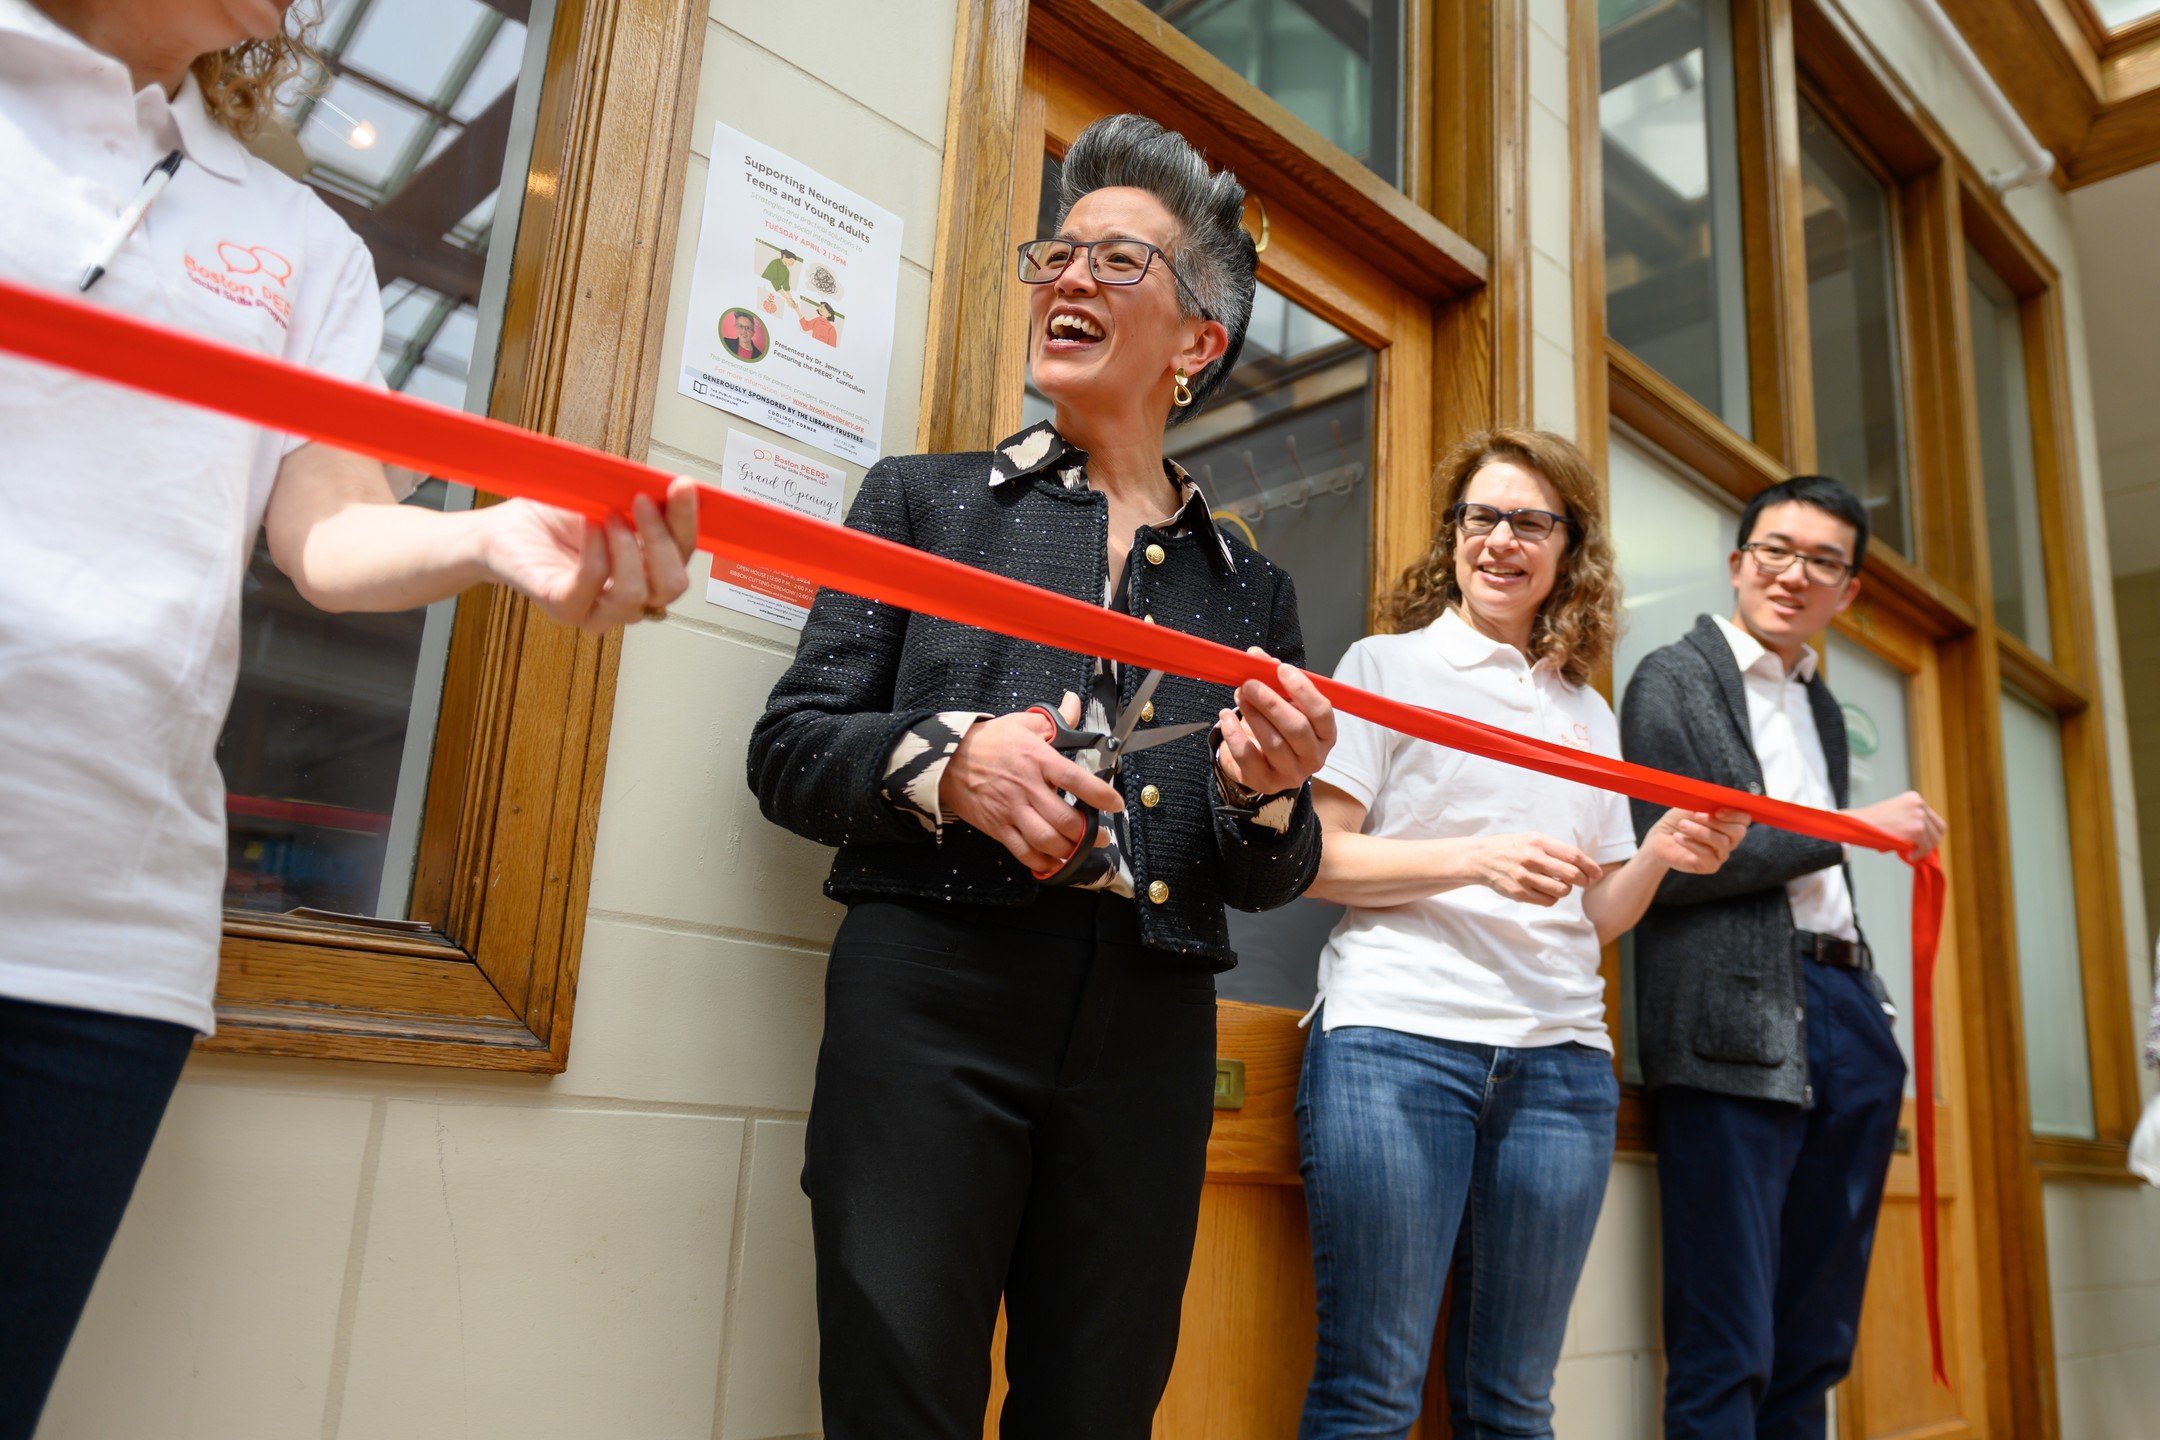 It&rsquo;s official &ndash; Boston PEERS&reg; doors are OPEN! 

Huge thank you to Brookline News for featuring our Open House and Ribbon Cutting Ceremony this past weekend! https://brookline.news/new-coolidge-corner-business-offers-social-skills-trai